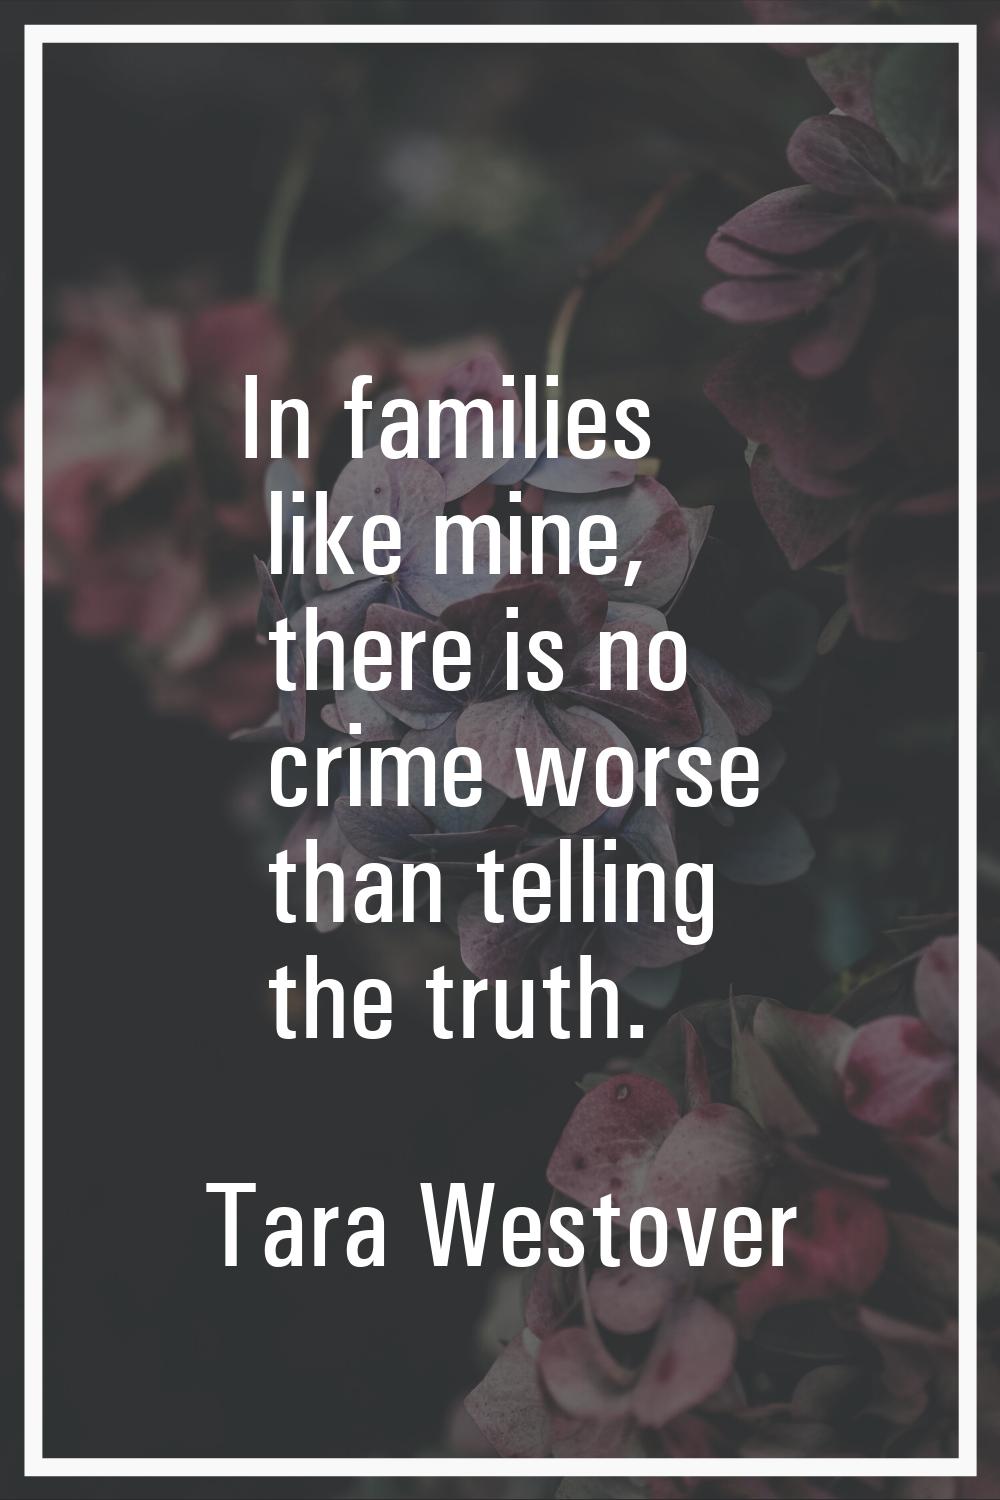 In families like mine, there is no crime worse than telling the truth.